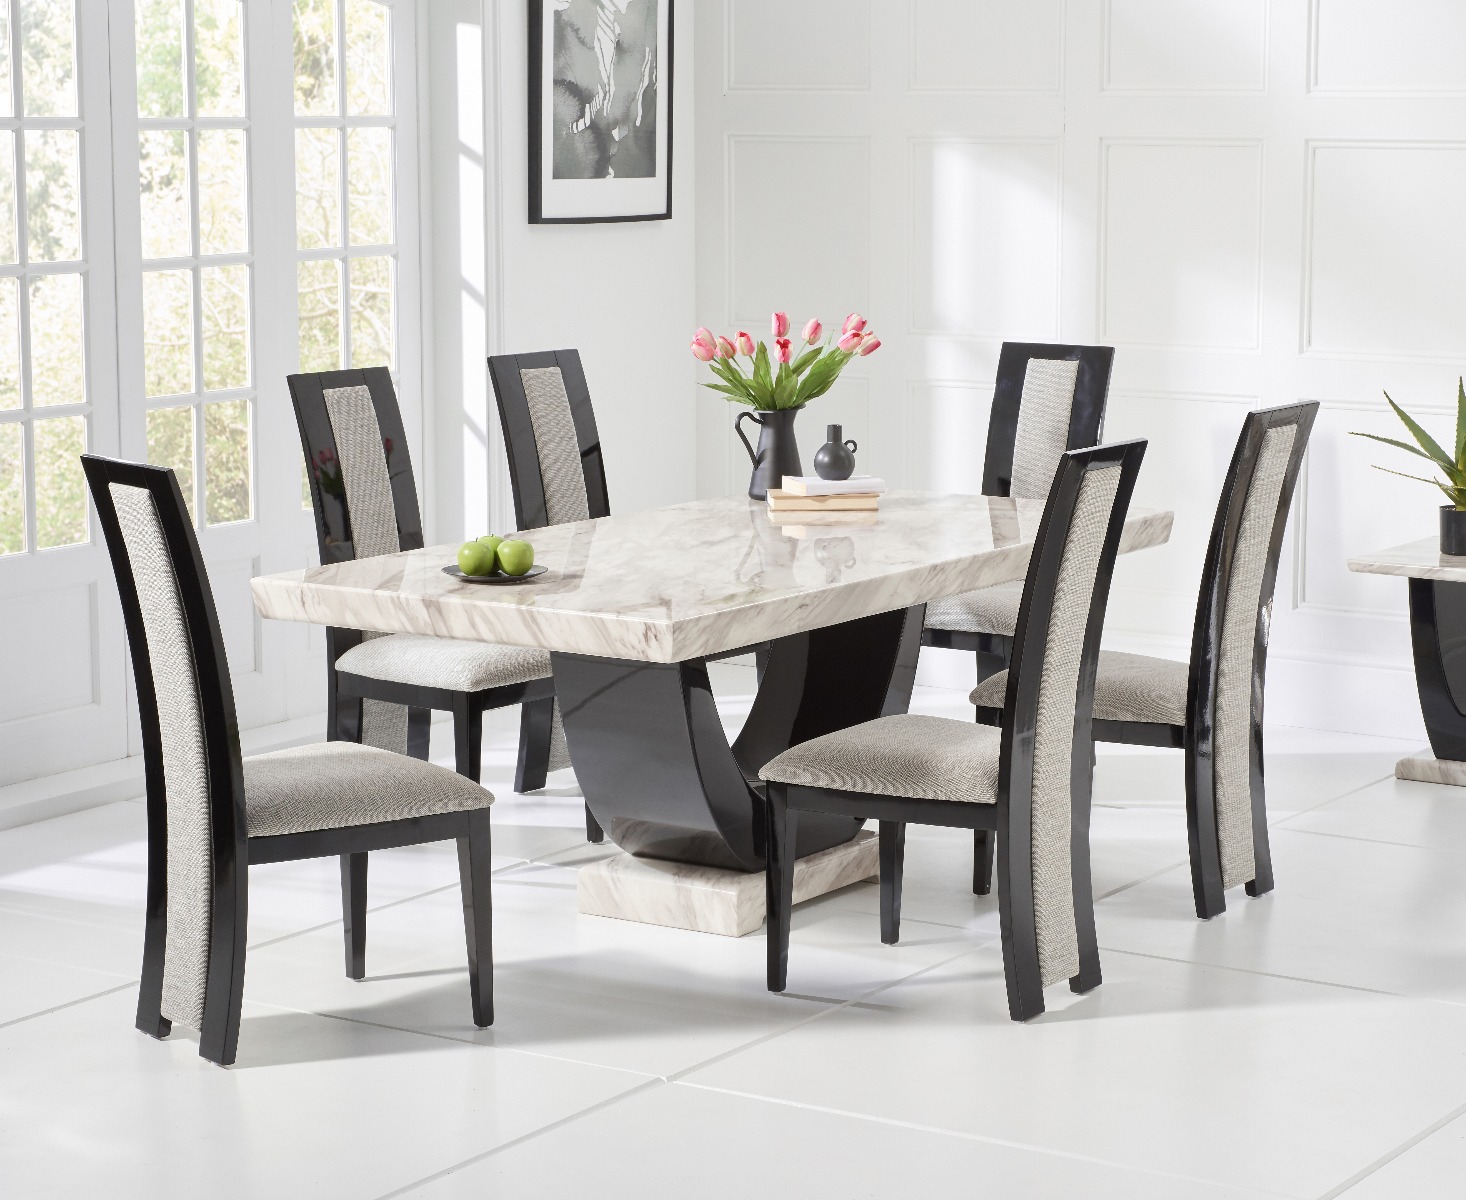 Raphael 170cm Cream And Black Pedestal Marble Dining Table With Raphael Chairs